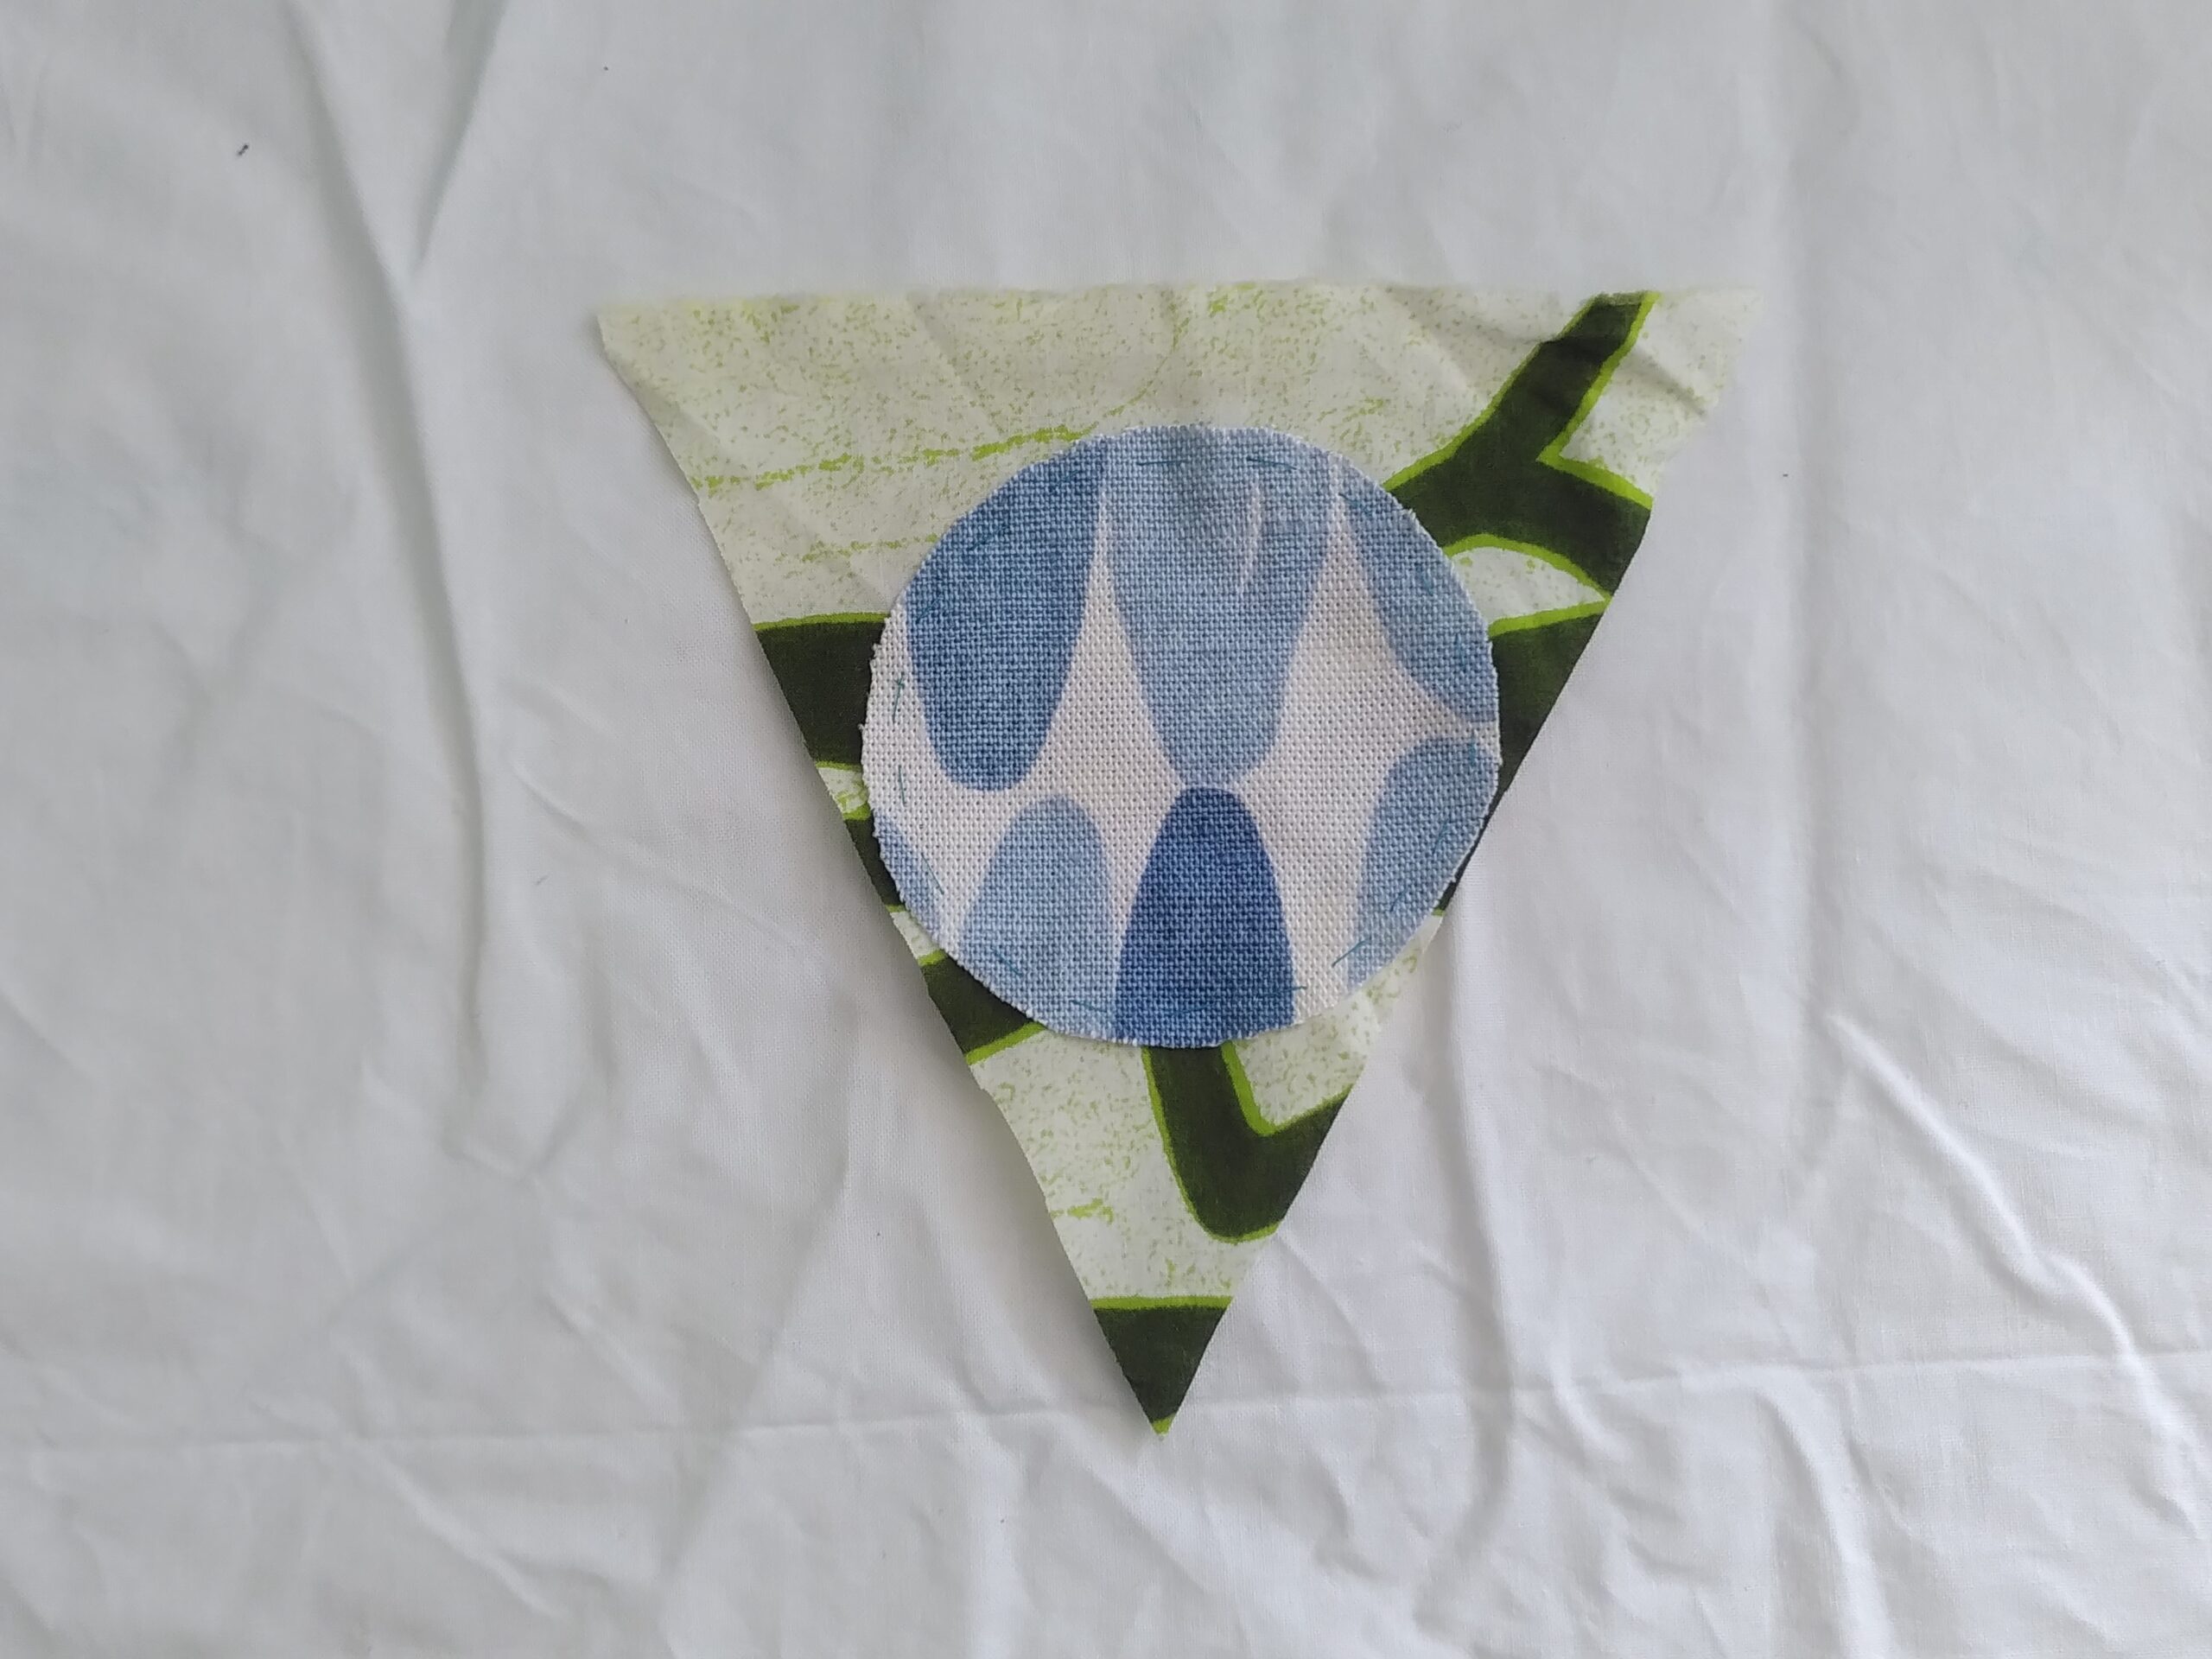 On a creased white fabric background lies a triangle of material, patterned with thick green lines over which is placed a small circle of fabric with blue patterns on it